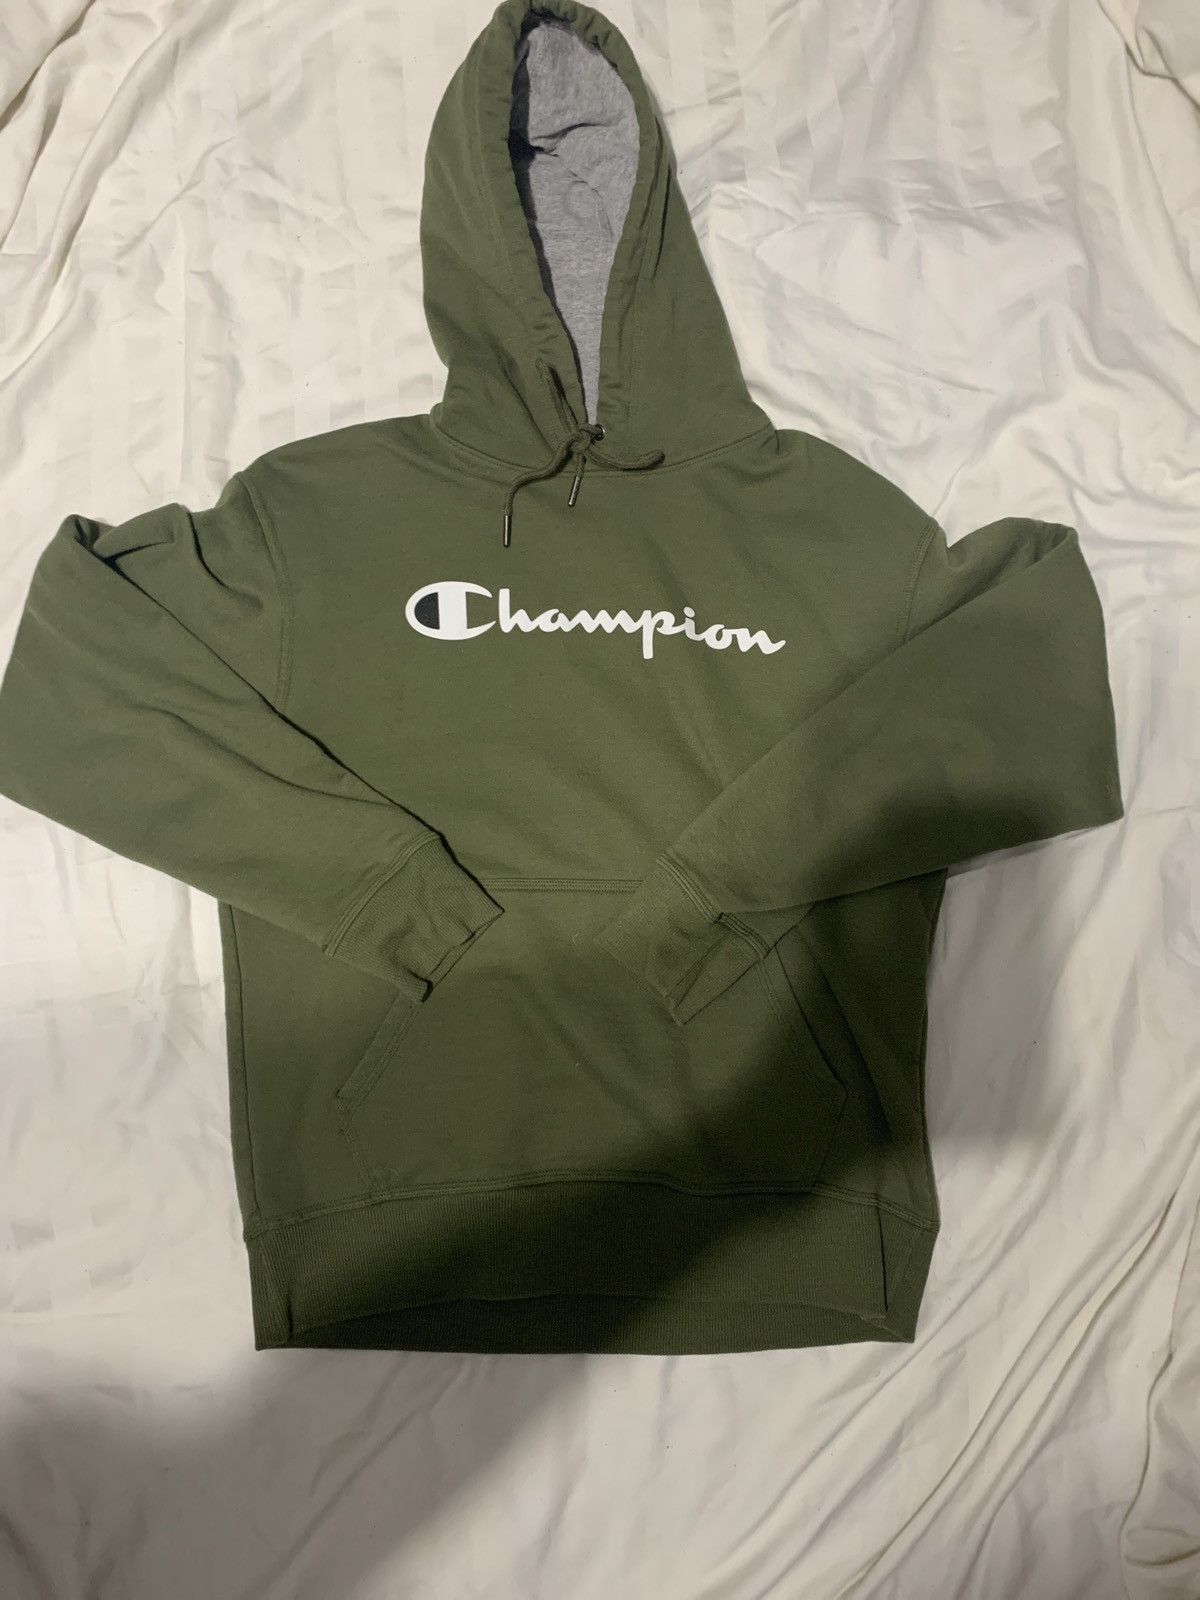 Olive green champion hoodie | Grailed